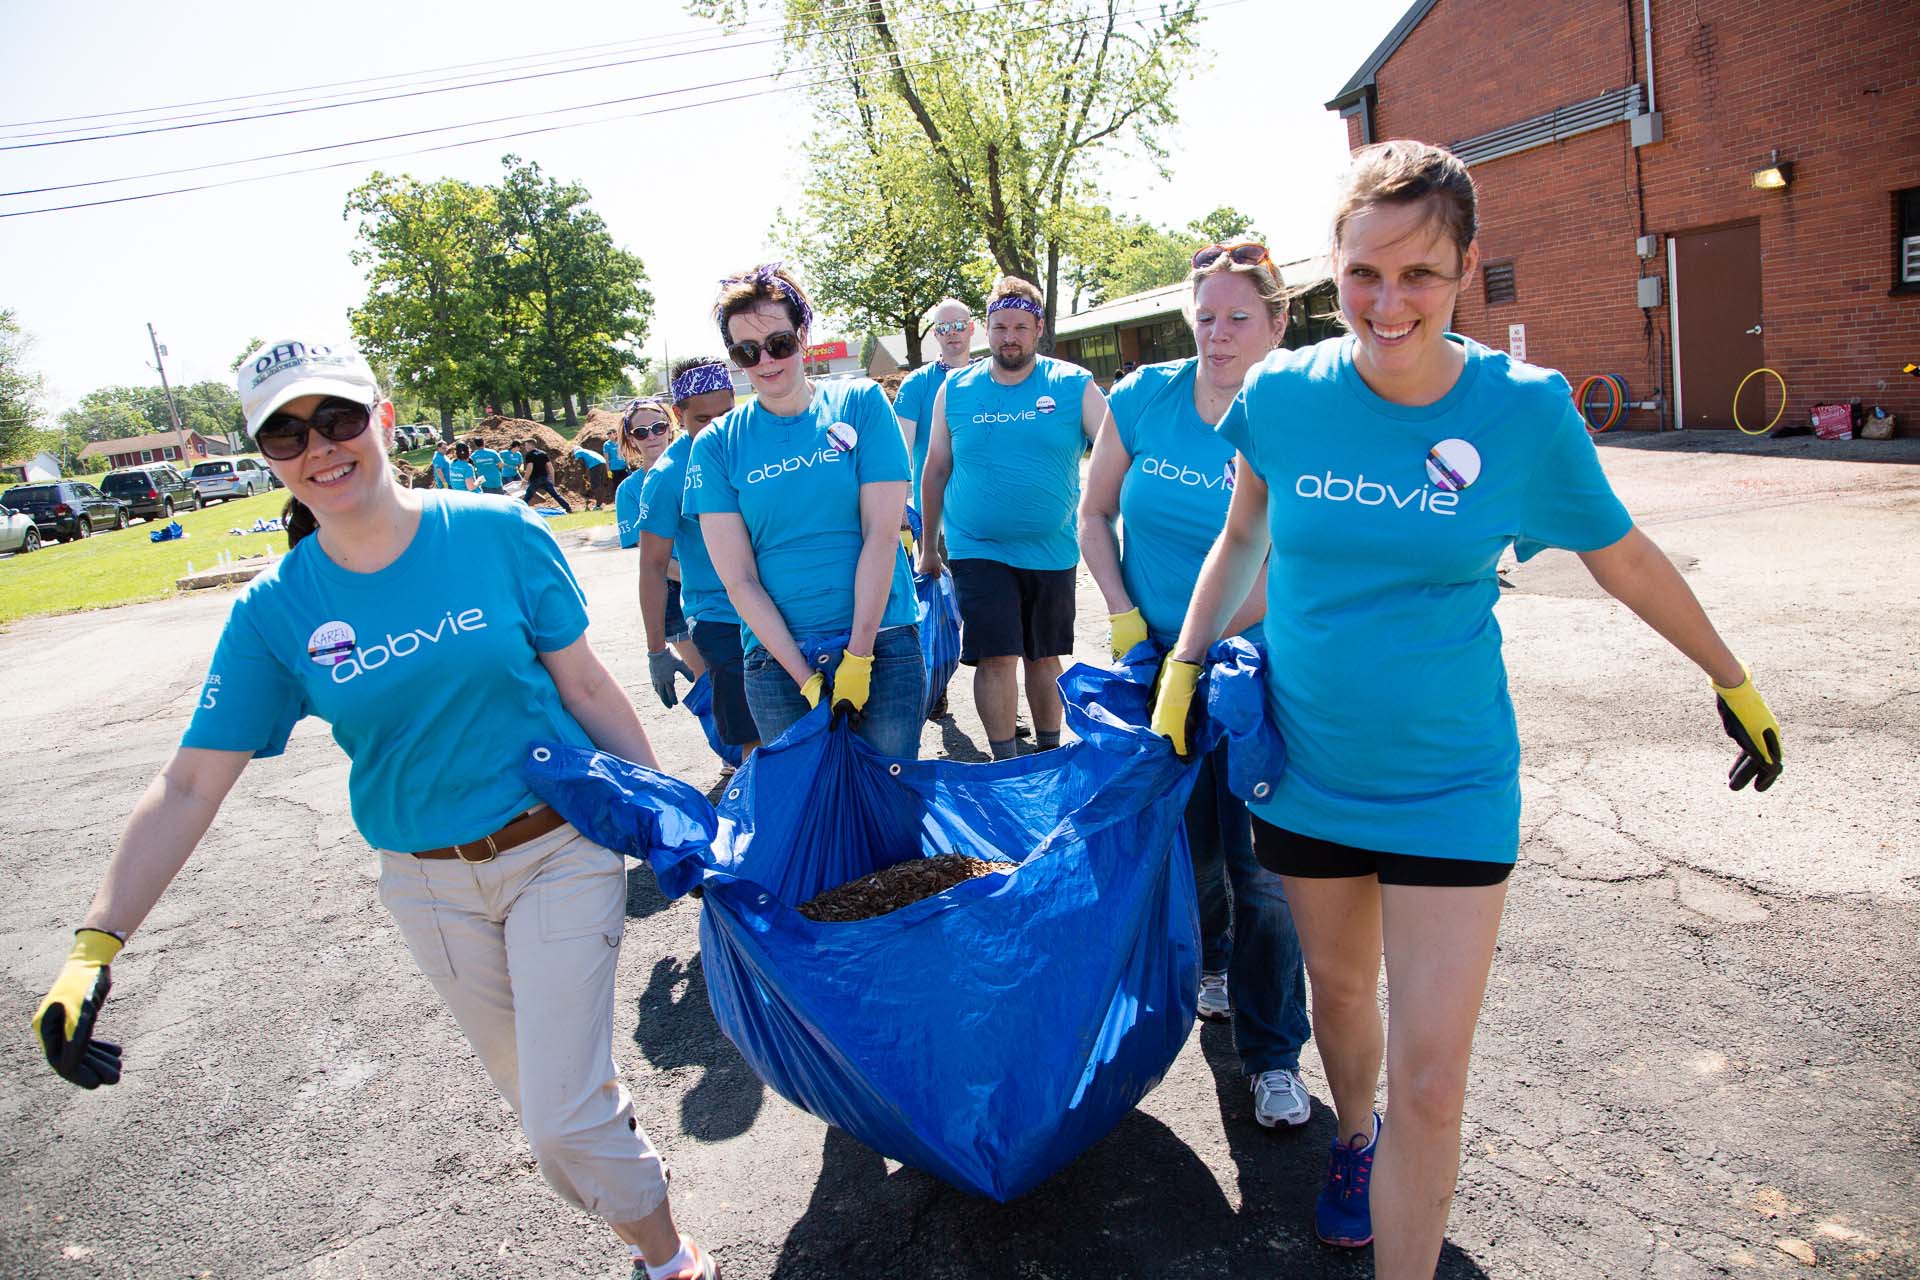 Across the world, AbbVie employees will volunteer where they live and work.